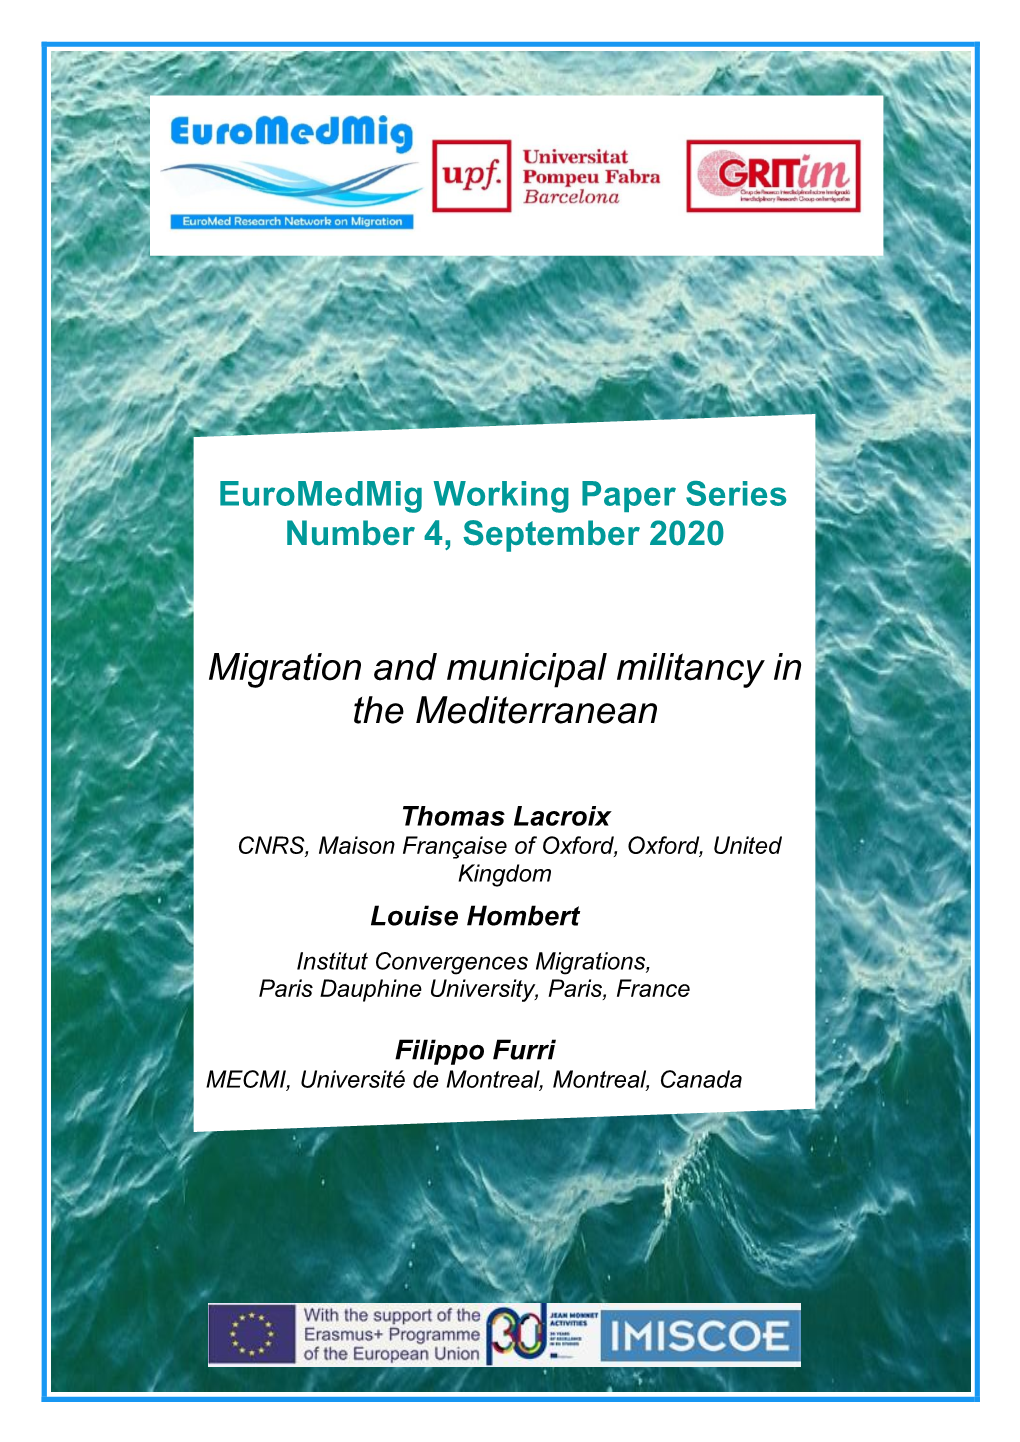 Migration and Municipal Militancy in the Mediterranean.” Euromedmig Working Paper Series, No